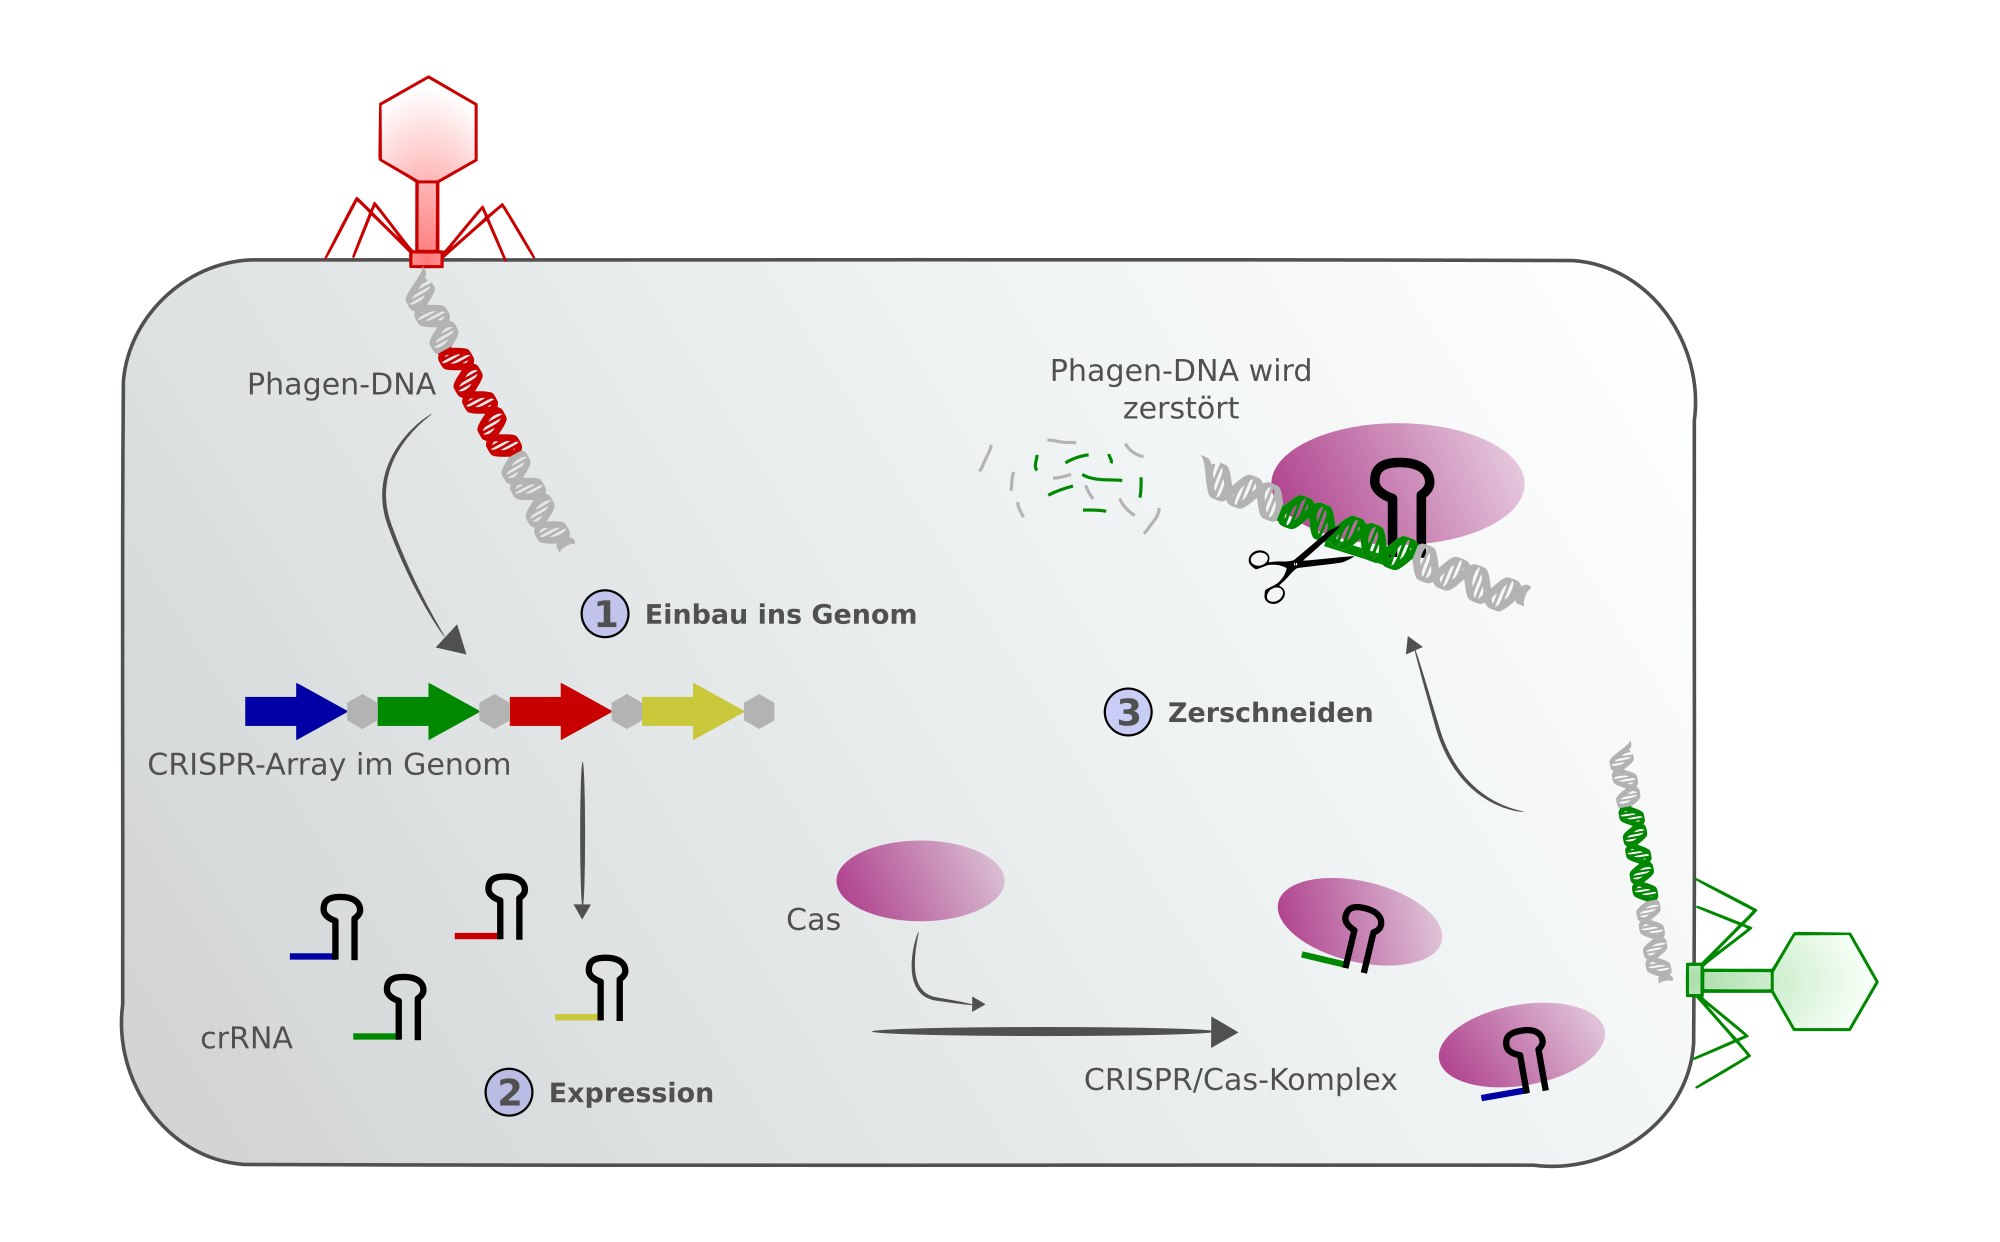 Schematic showing the defence chain of a prokaryote with CRISPR/Cas - integration of a phage genome into the CRISPR array and an infection of another phage whose genome is already 